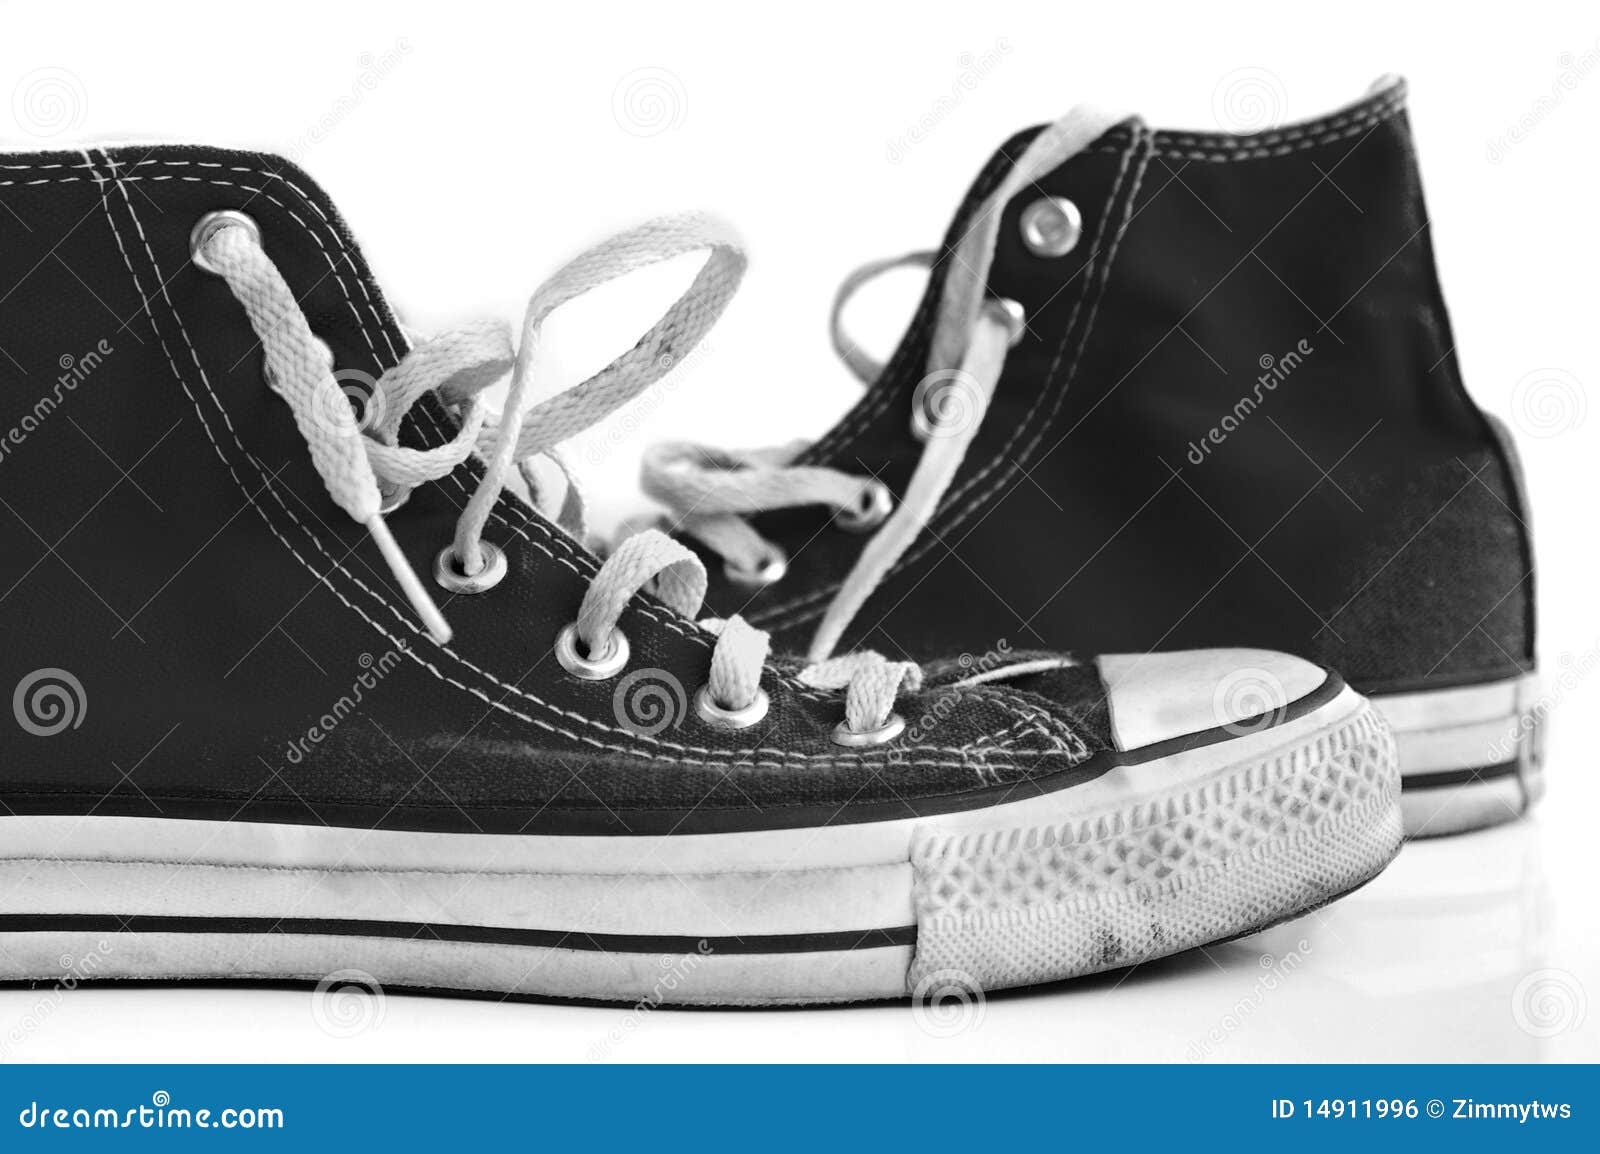 Old sneakers stock photo. Image of laces, taylor, sneakers - 14911996